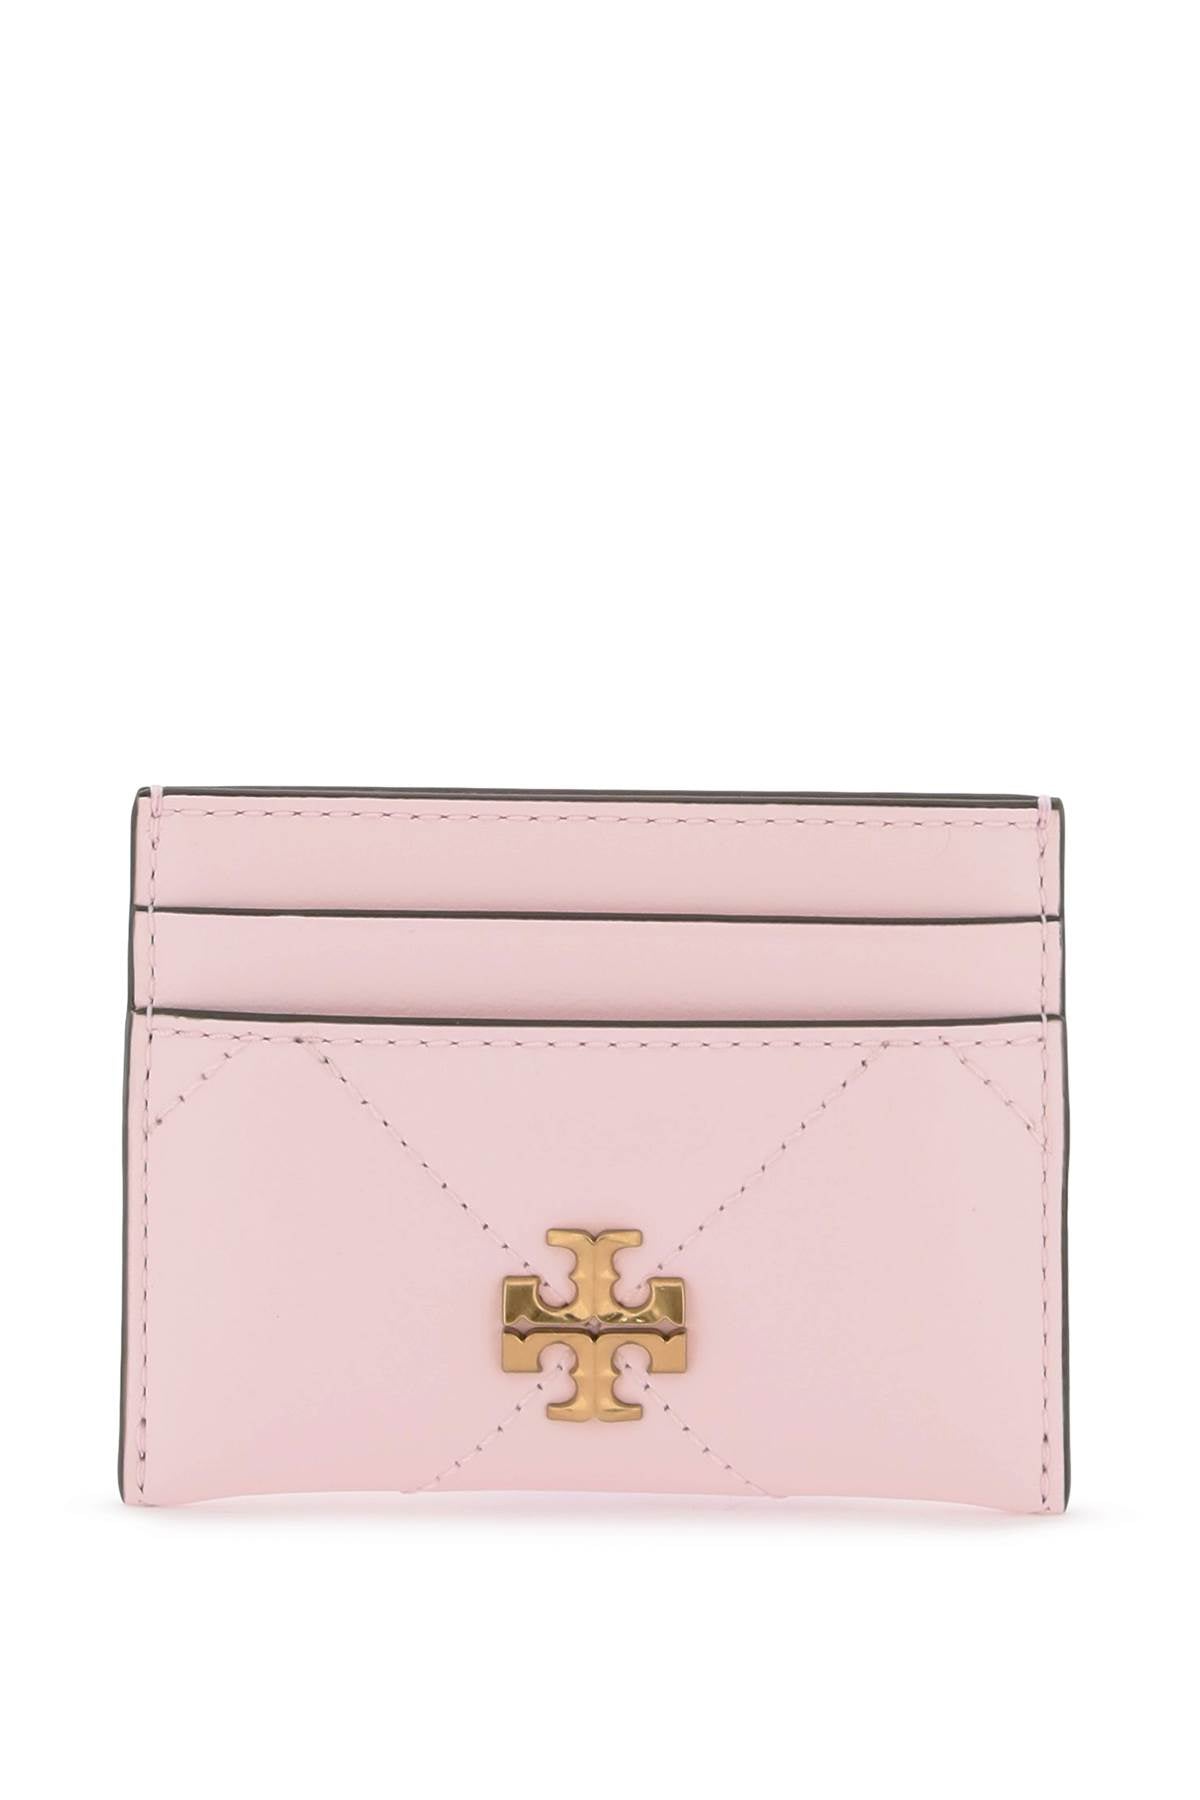 Tory burch kira card holder with trapezoid-0